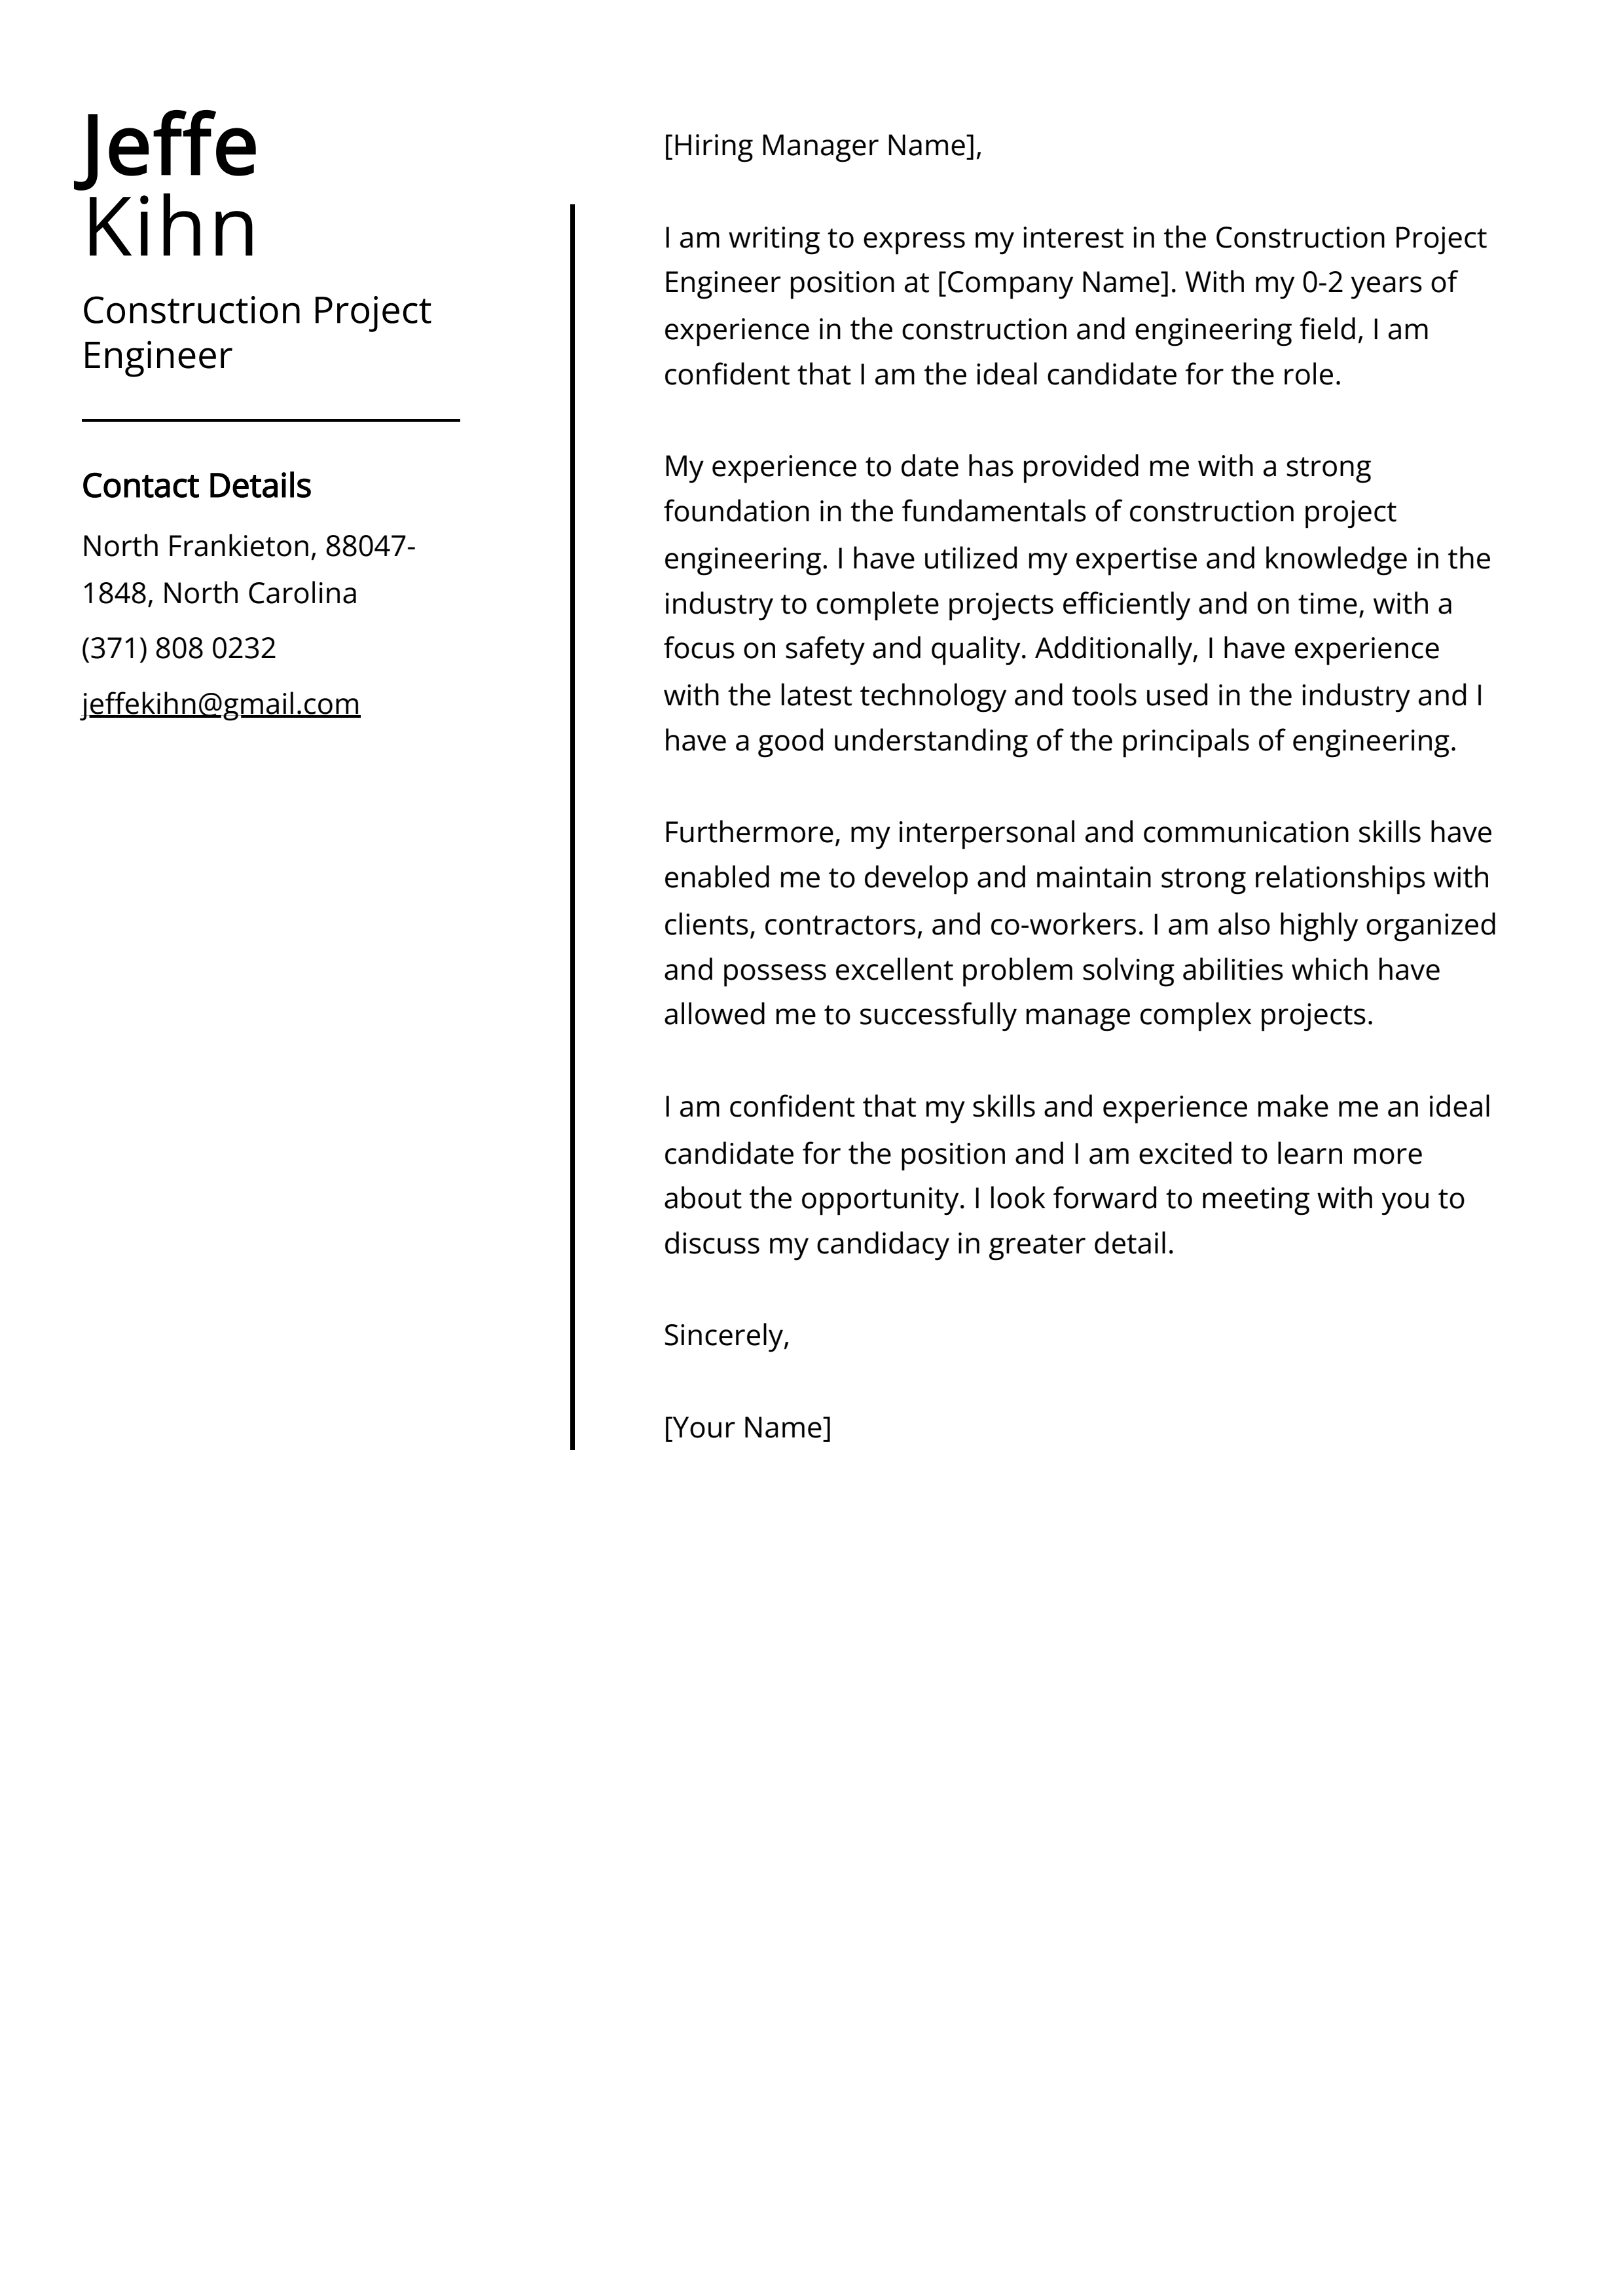 Construction Project Engineer Cover Letter Example